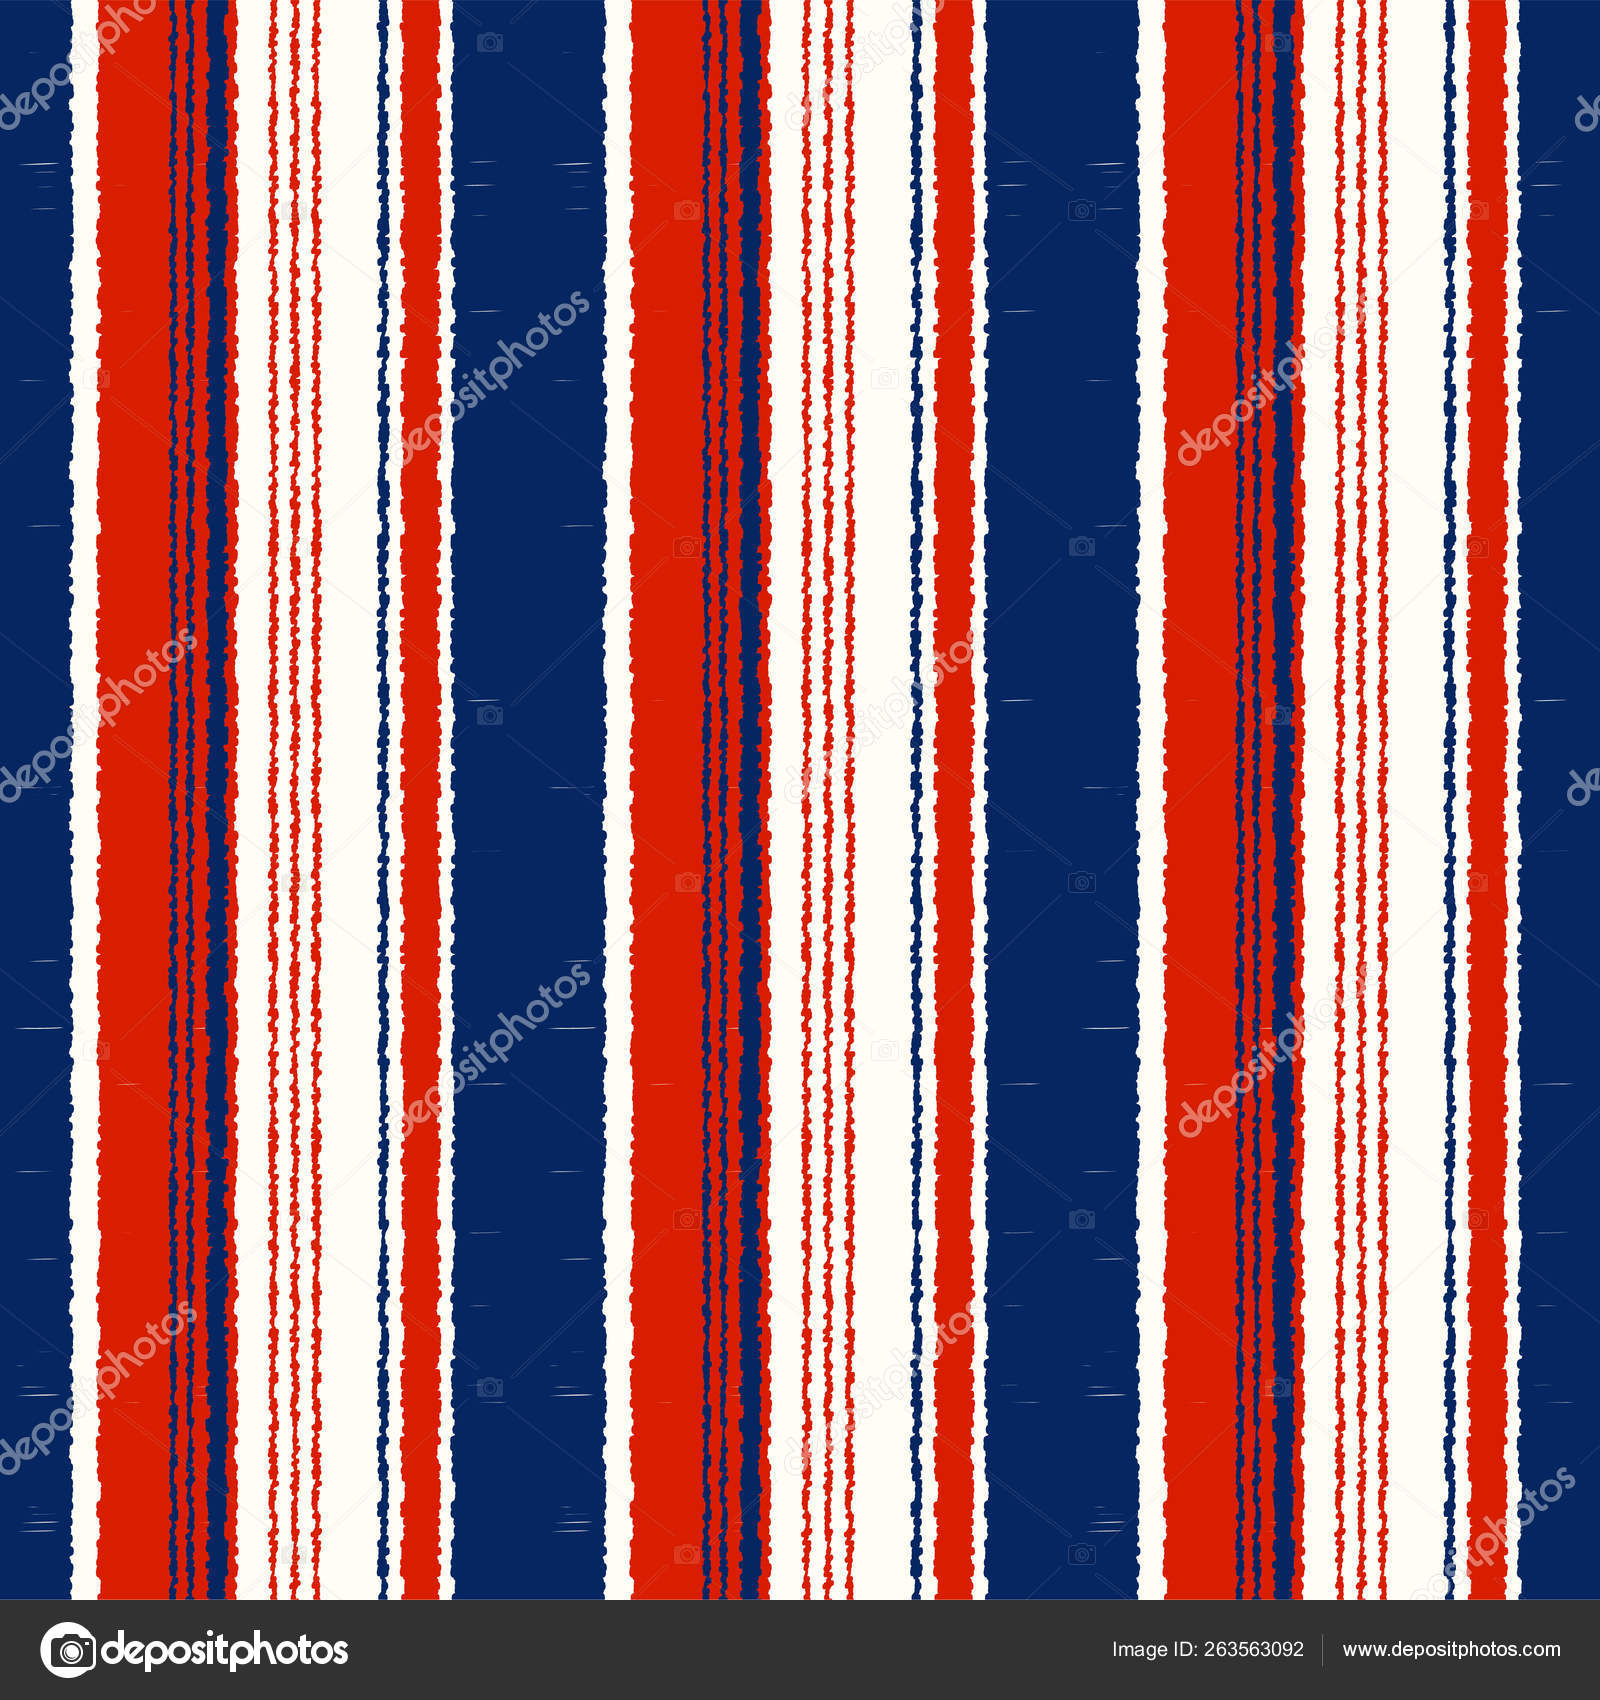 Navy Blue Red White Striped Seamless Pattern Vertical